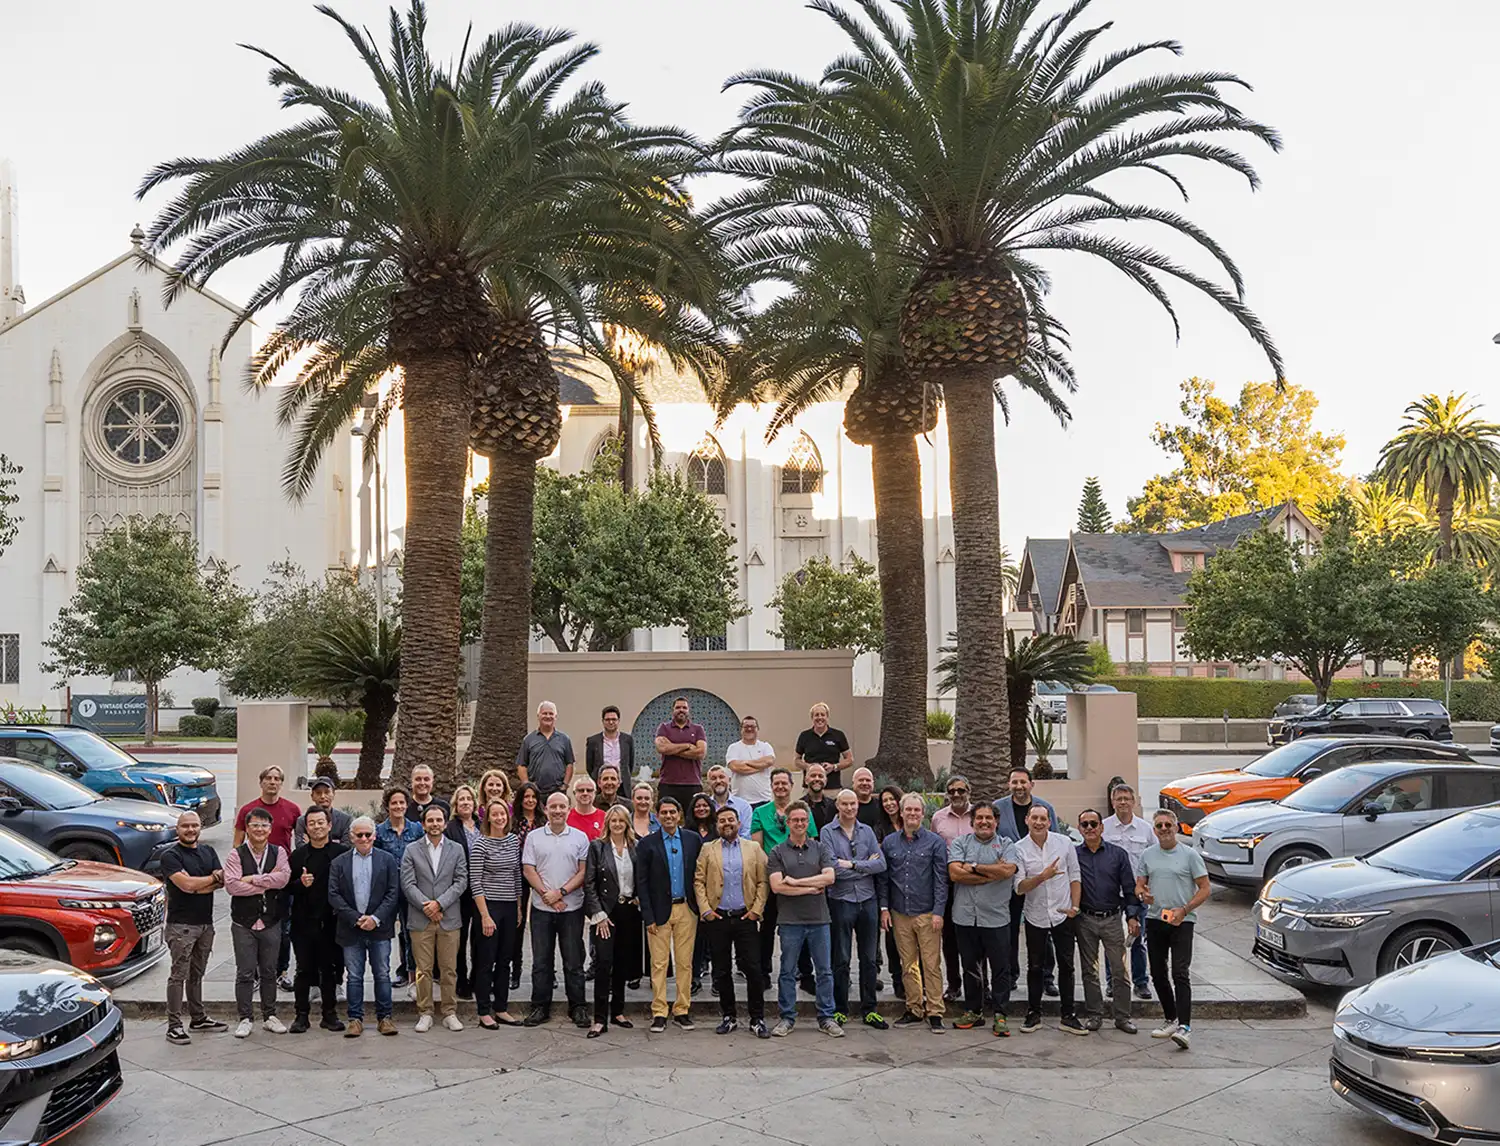 The Road to World Car 2024 marks 20th anniversary with a stop at the “L.A. Test Drives” event